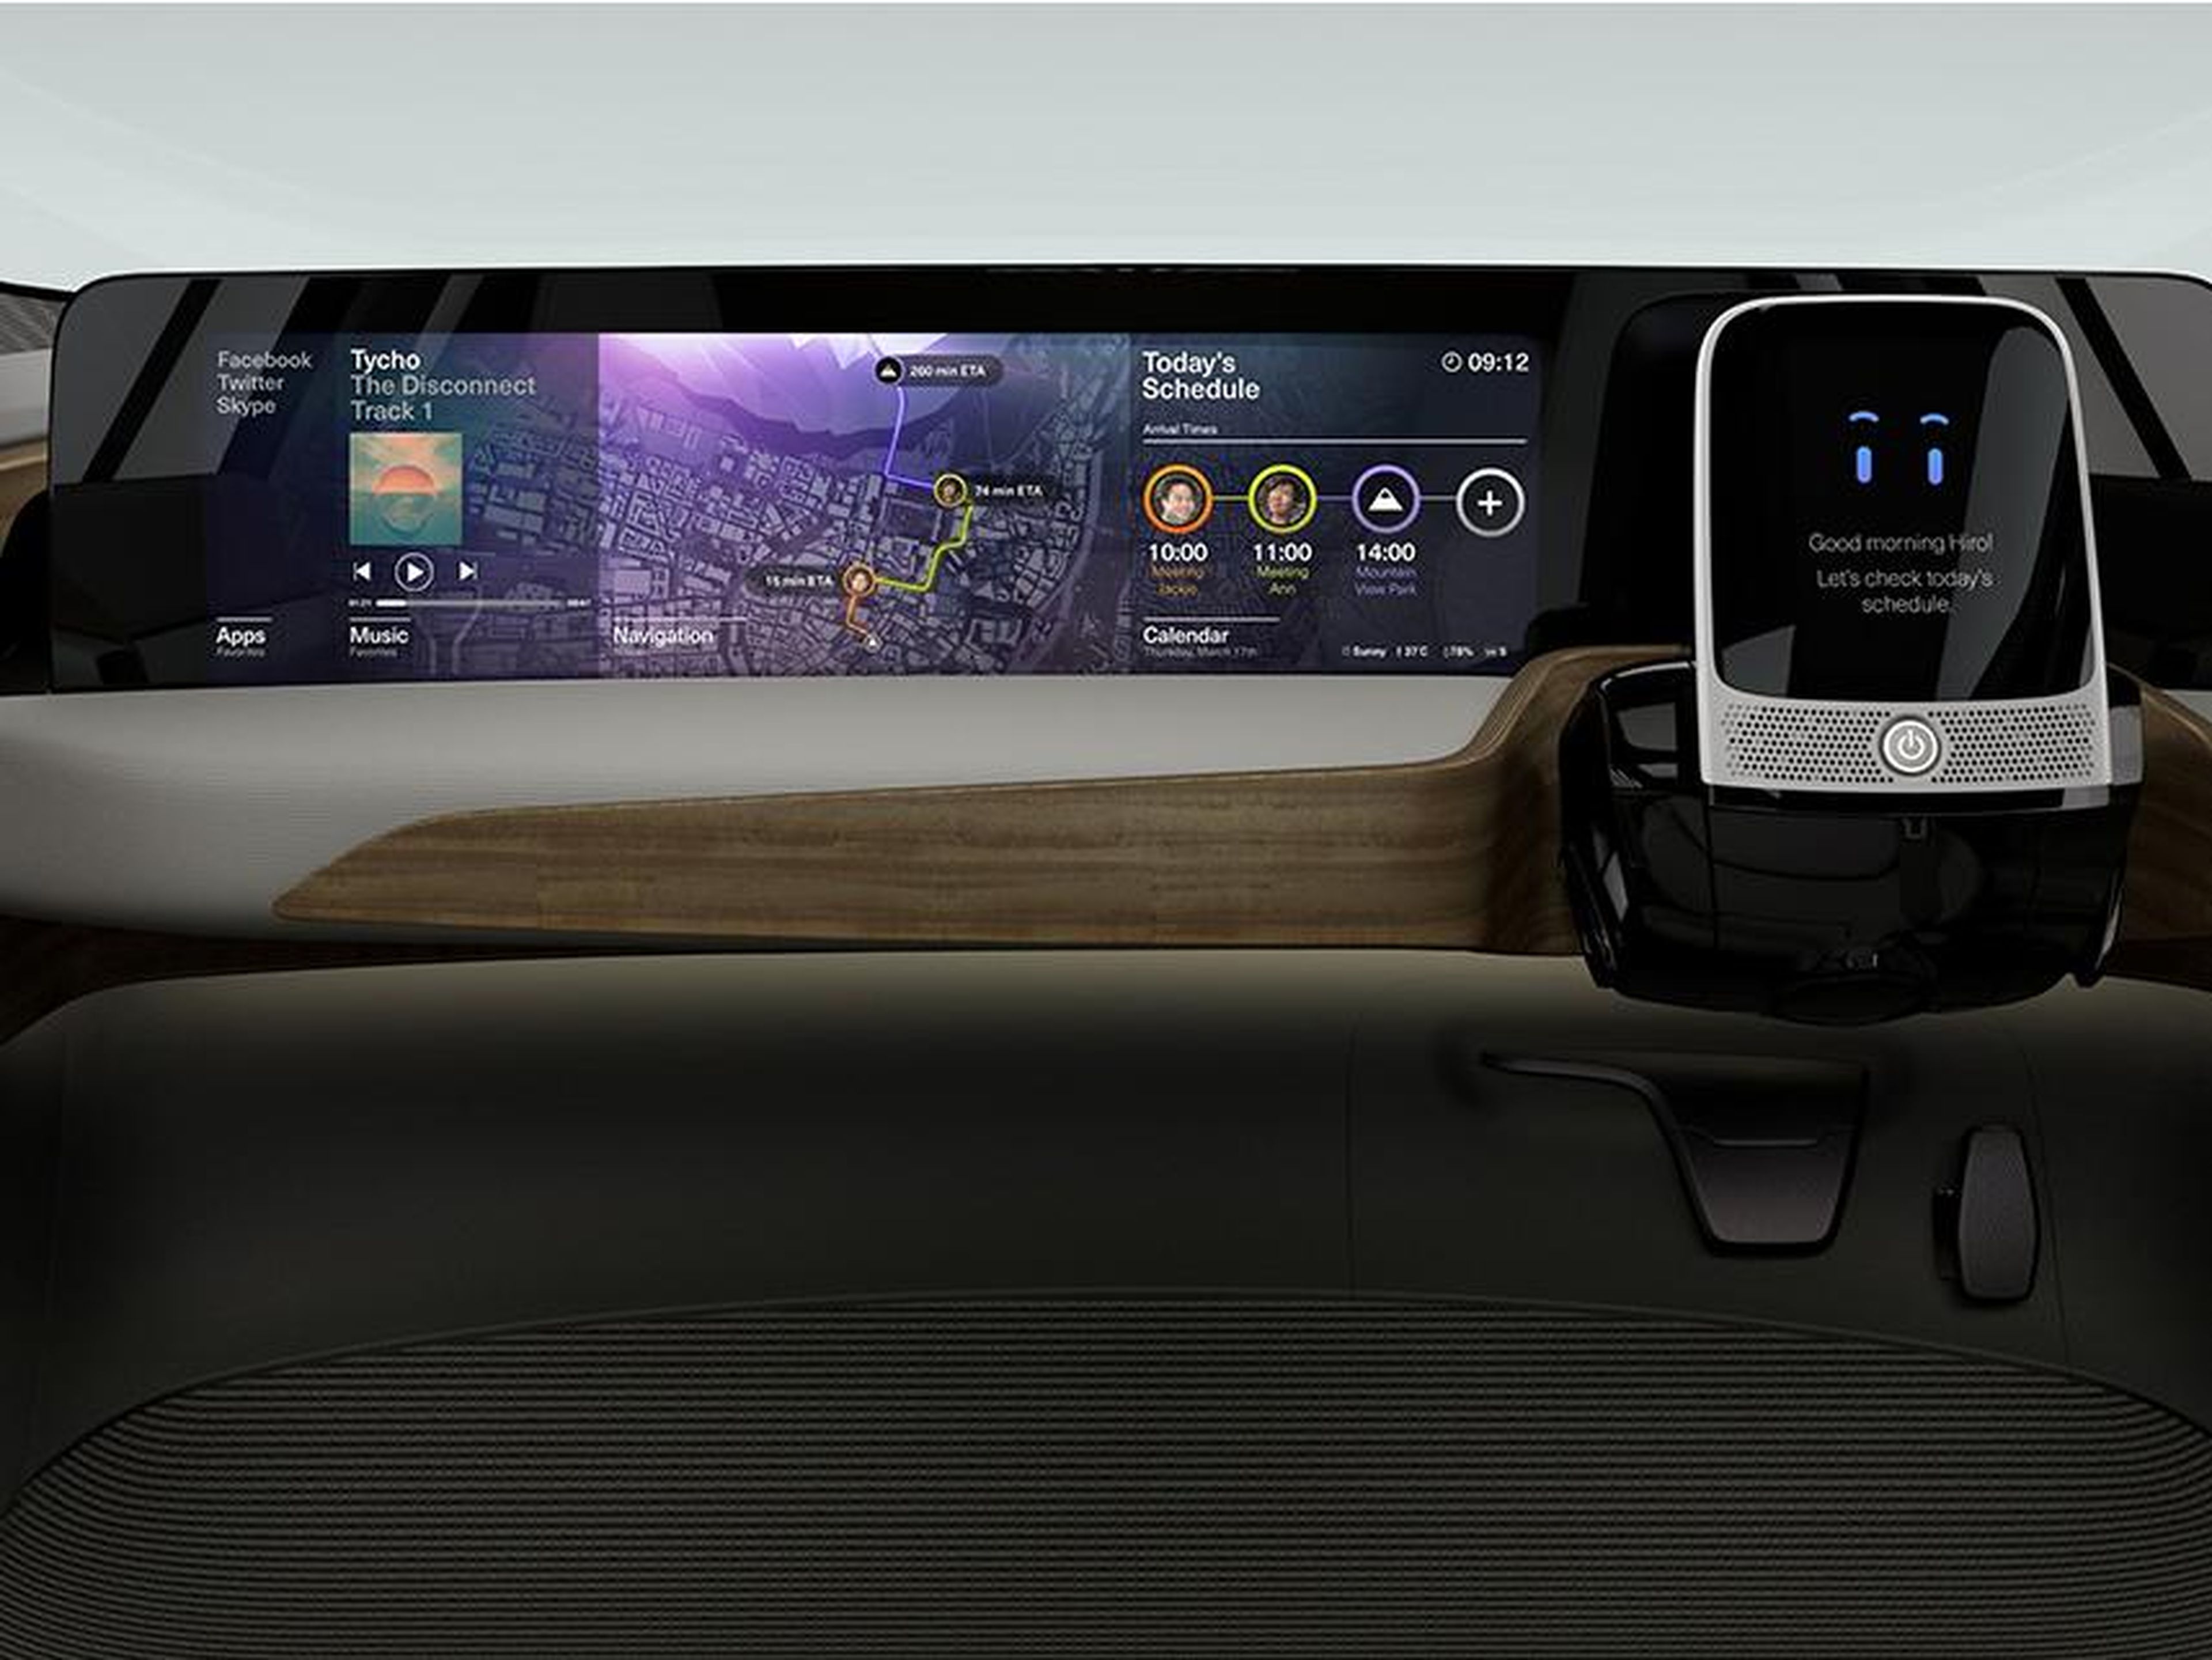 The IDS will have a steering wheel that turns into a tablet.